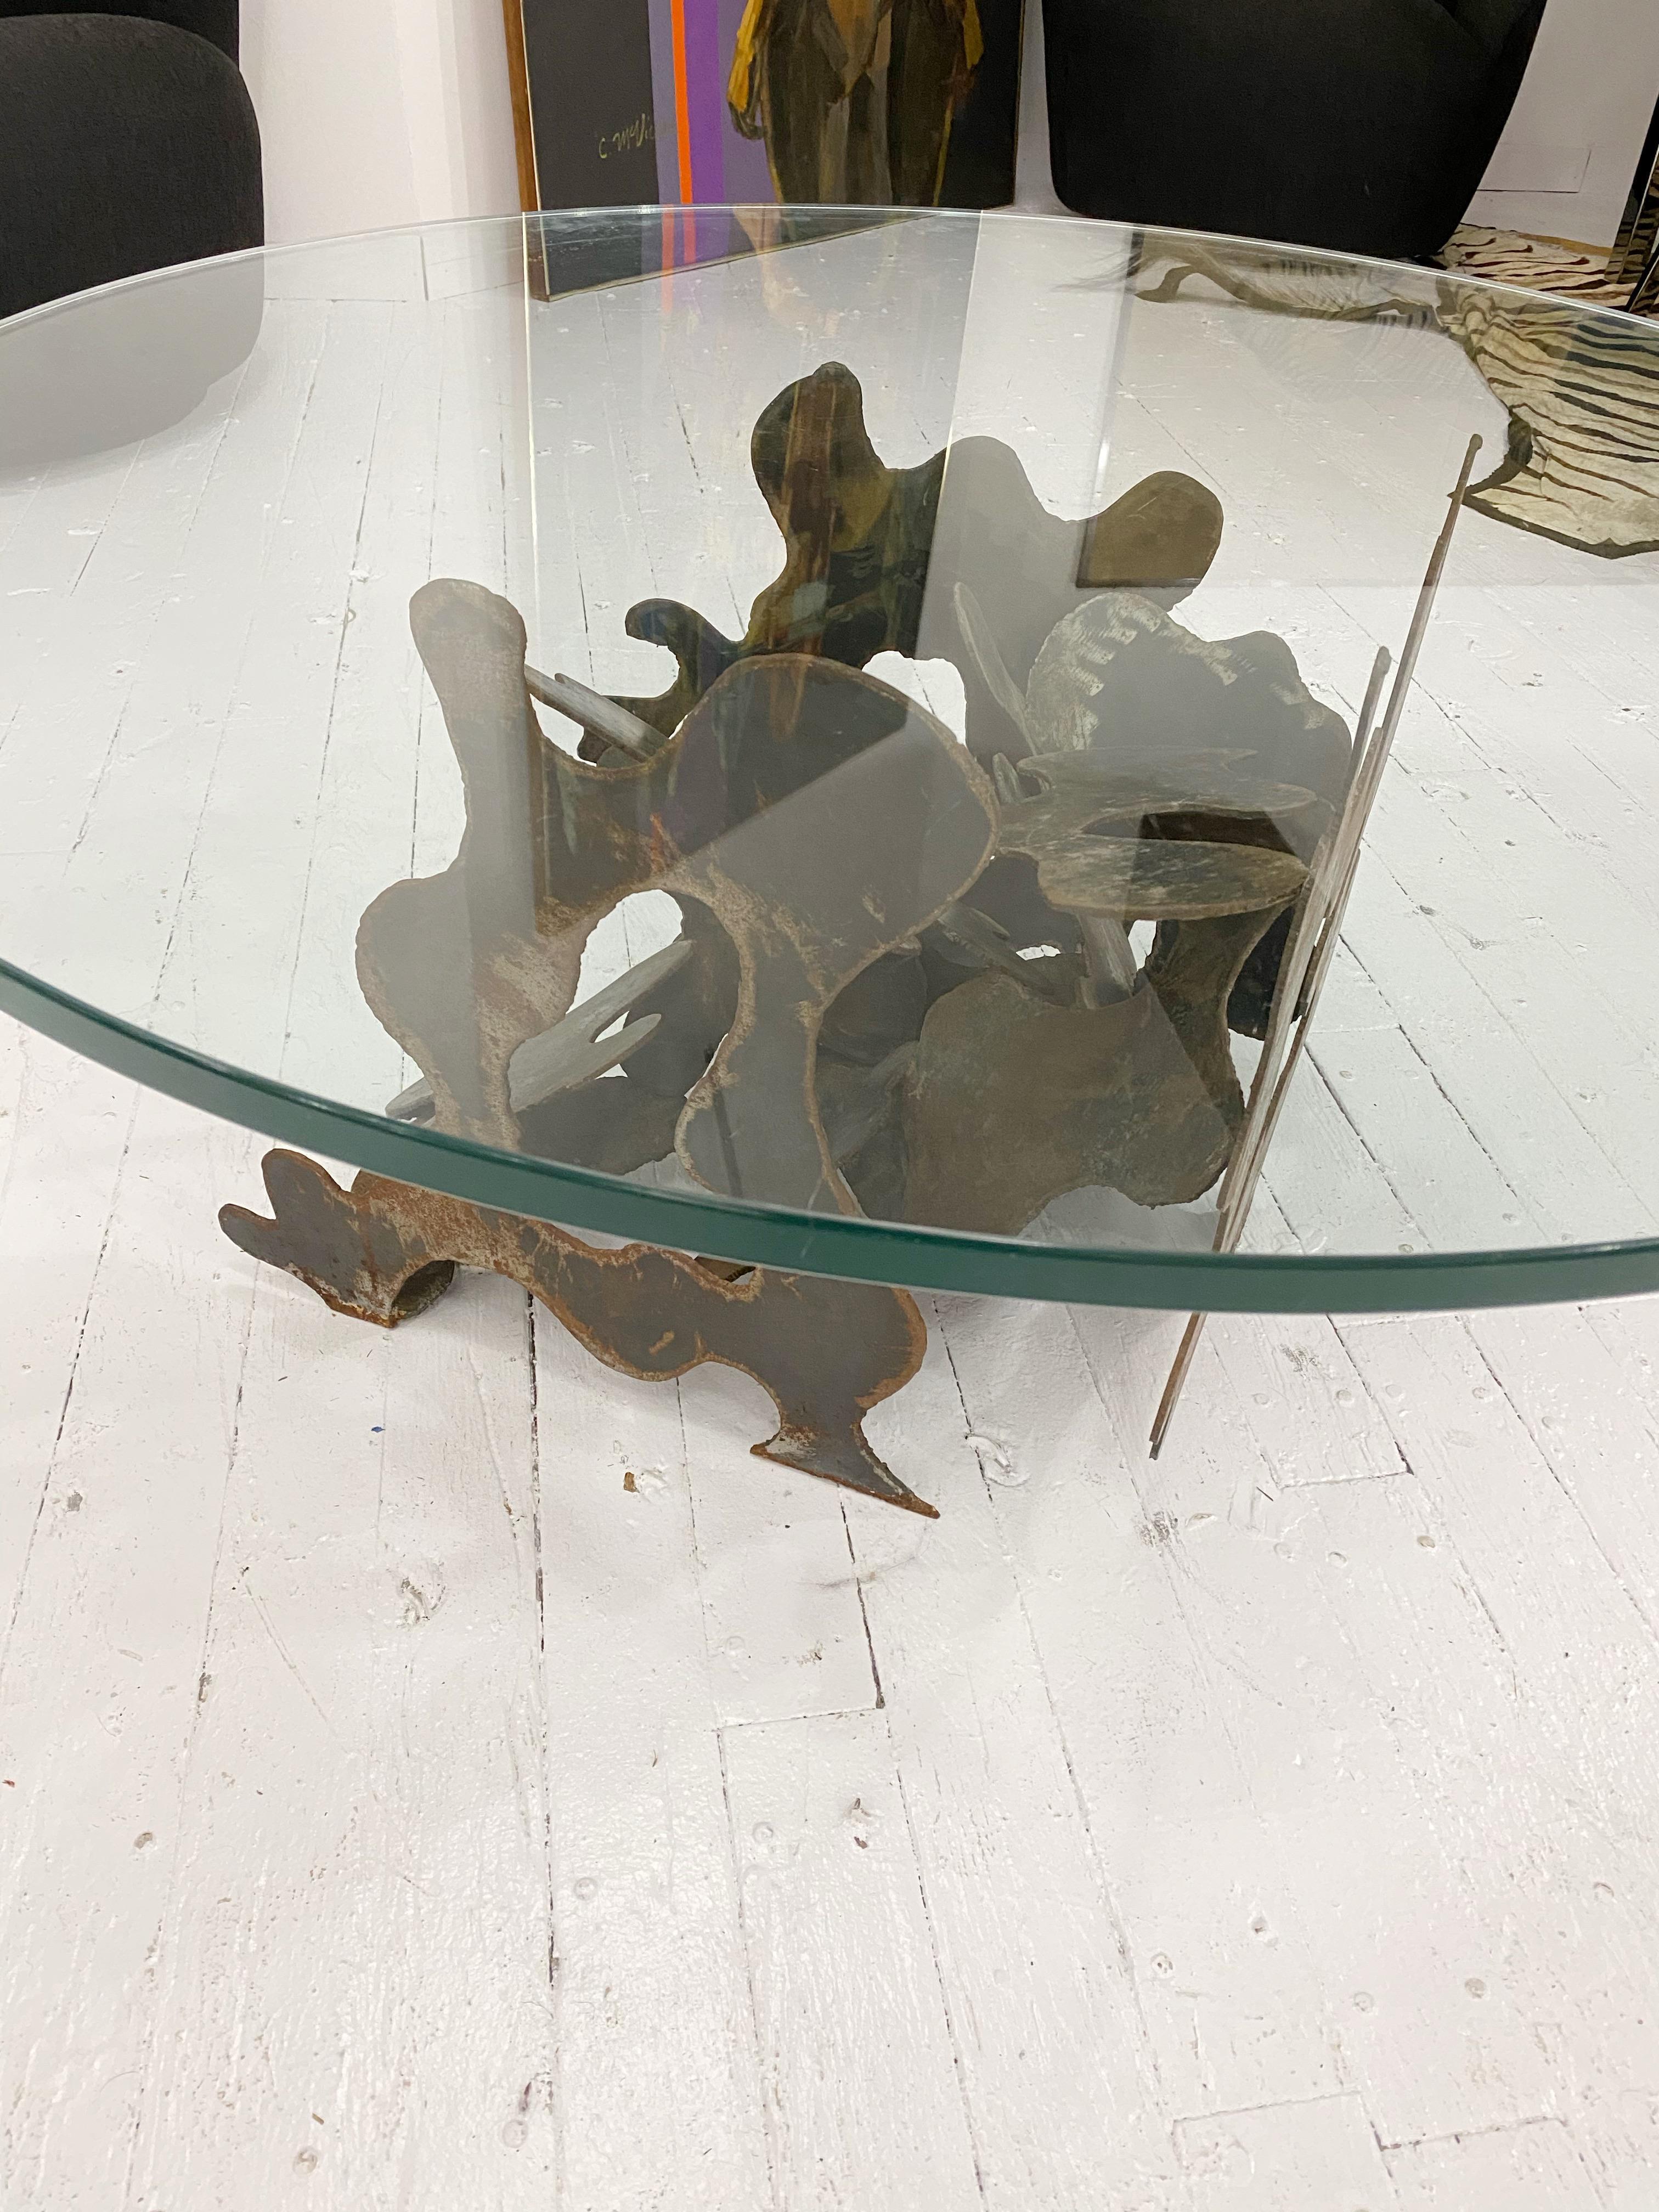 Artist made cut steel coffee table with glass top. In the style of Silas Seandel. Steel pieces cut in a curvy abstract pattern and welded together. Rusted patina.
Base measures: 20” wide 21” deep 17” high
Glass measures: 3/4” thick 41.5” wide